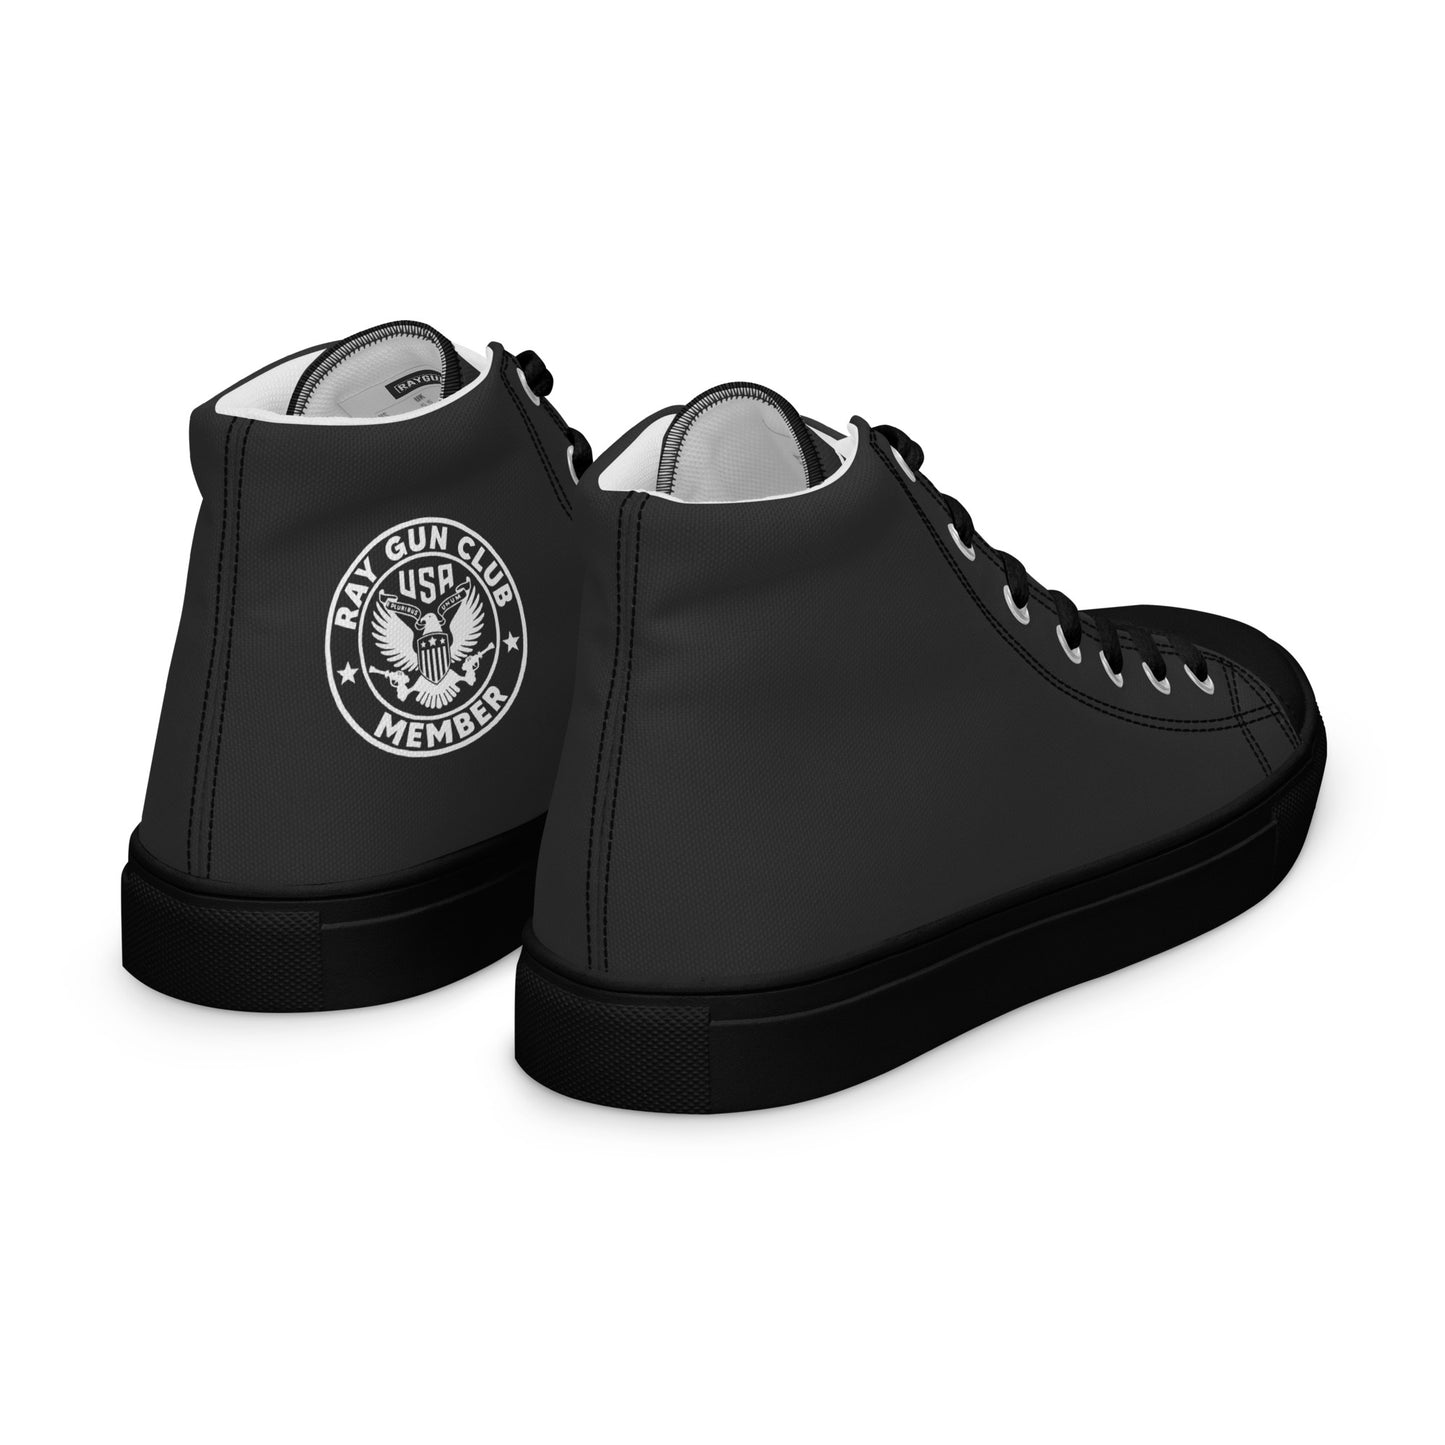 Men’s RAYGUN high top canvas shoes